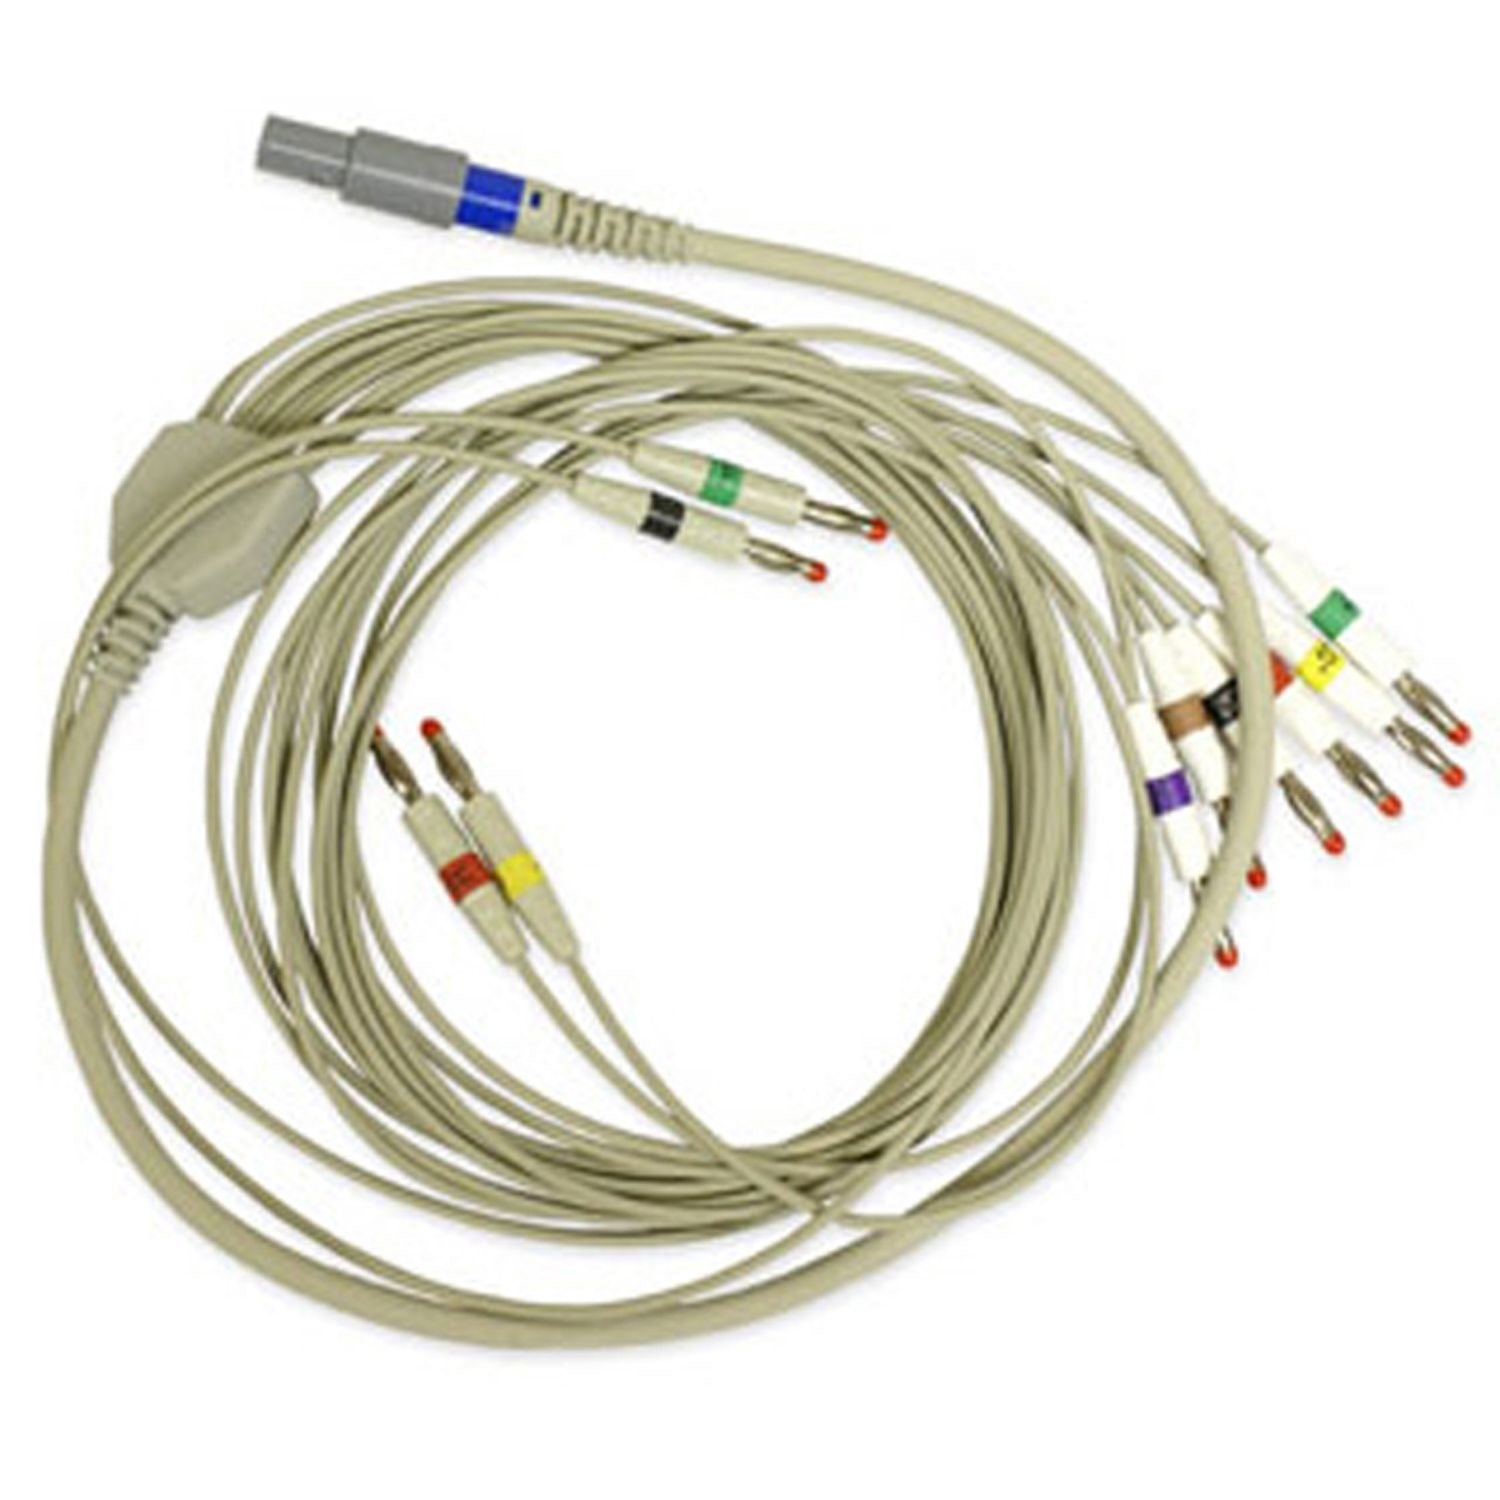 Patient Cable (Extra Long Cable), Rest, Pro, Banana, IEC